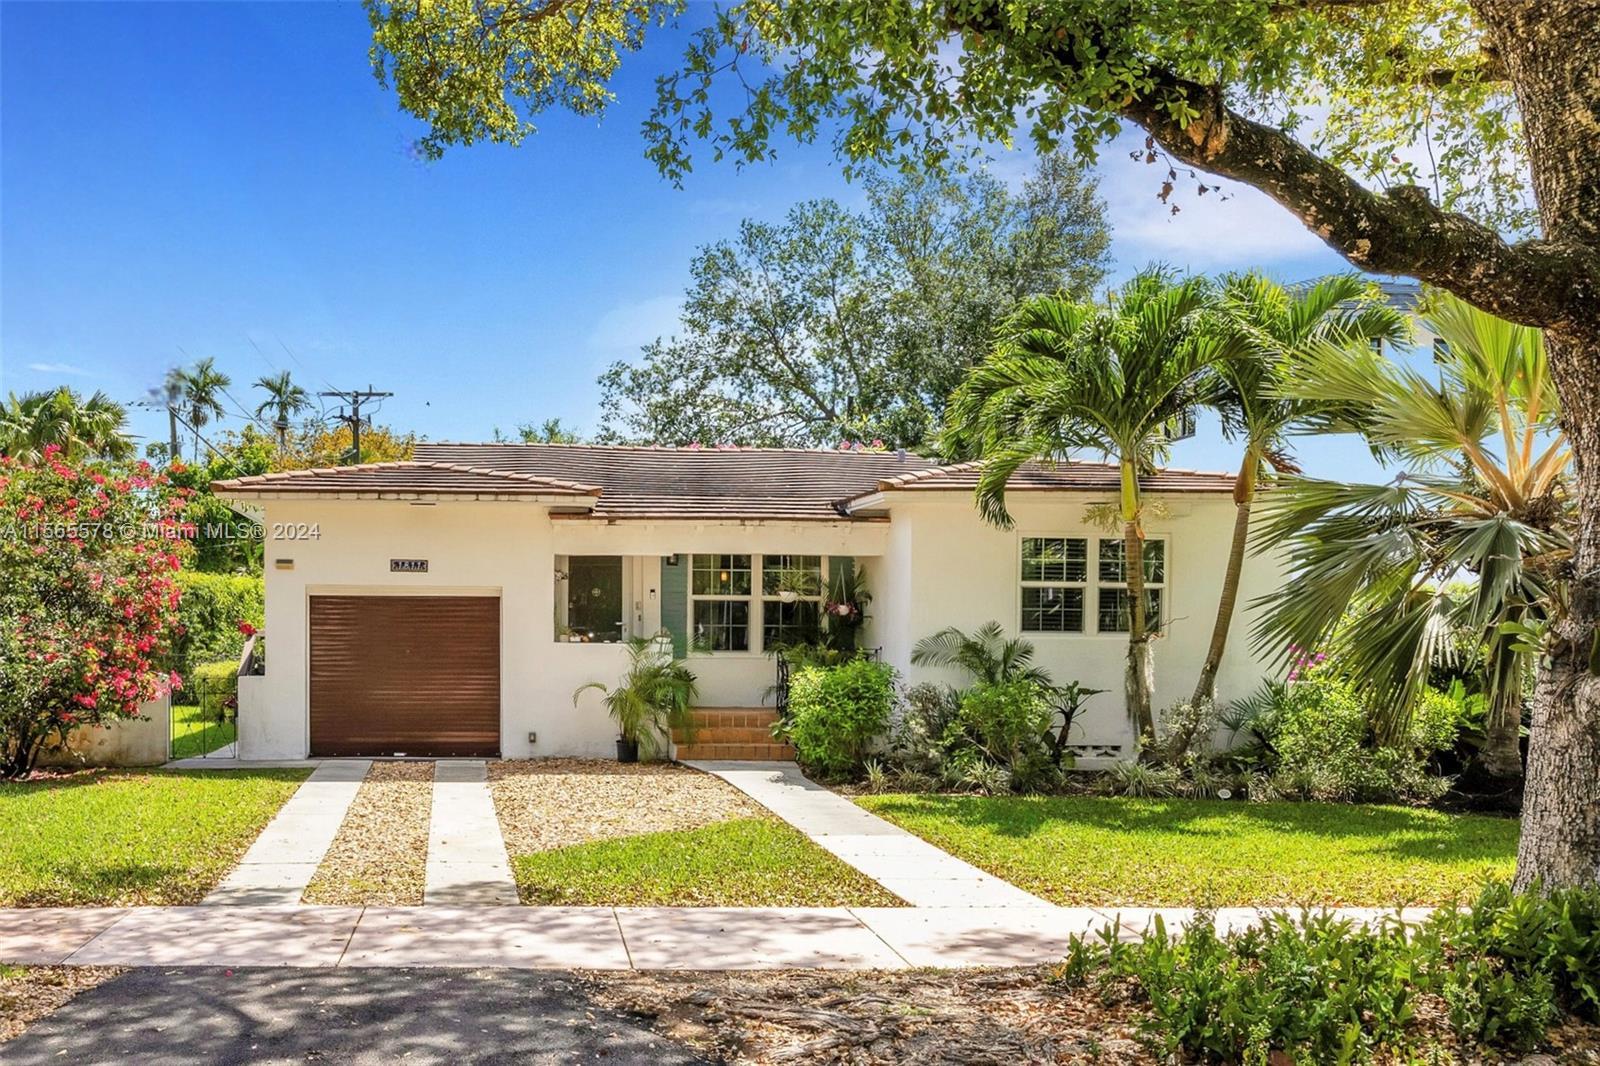 Nestled in Coral Gables, this charming 2 bedroom, 2 bathroom home exudes warmth with its timeless wo